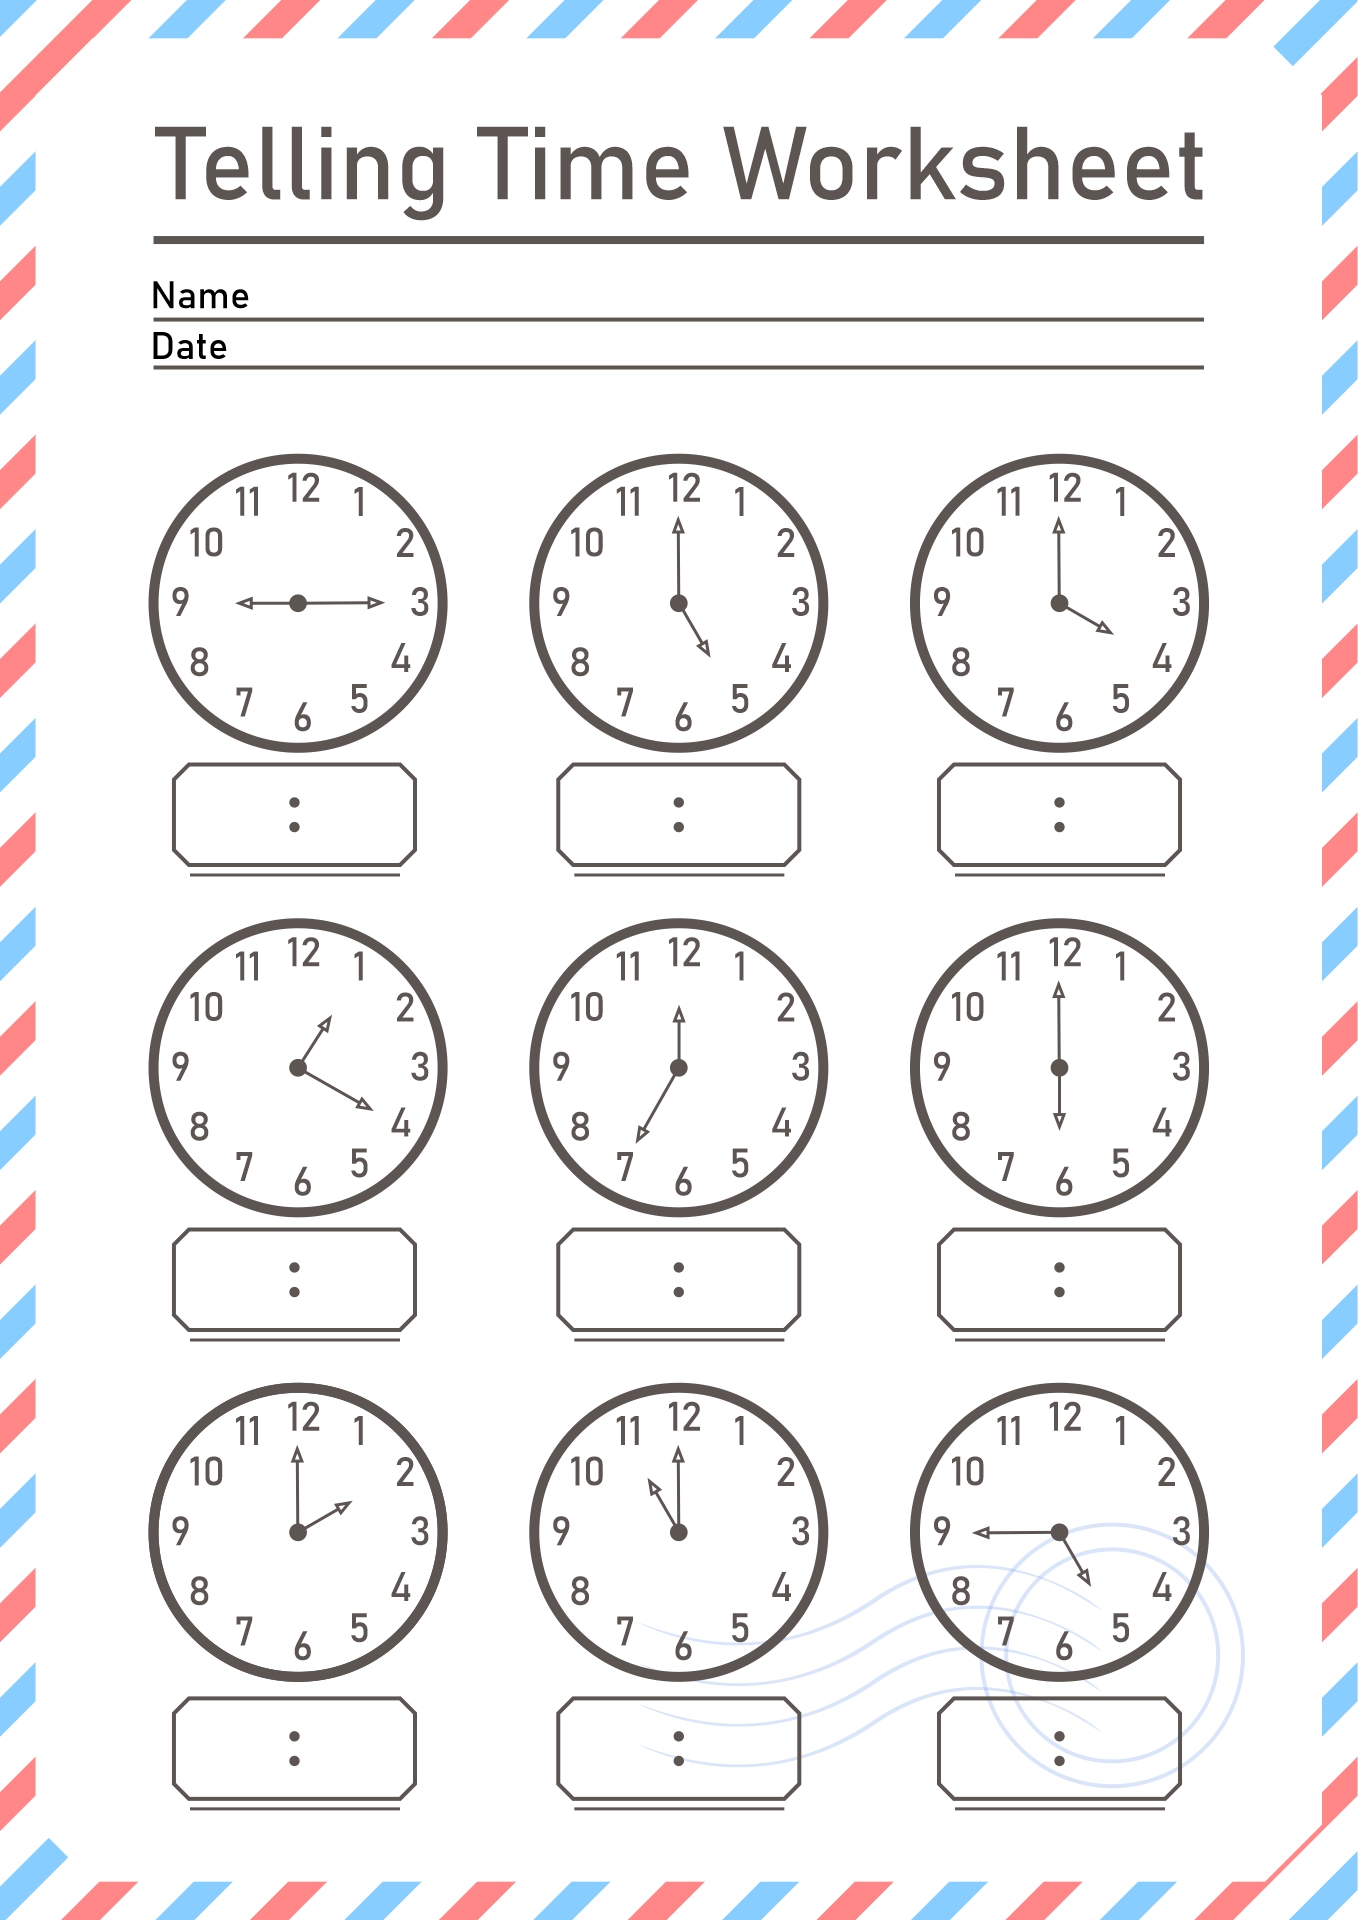 19 Telling Time Worksheets For First Grade Free PDF At Worksheeto